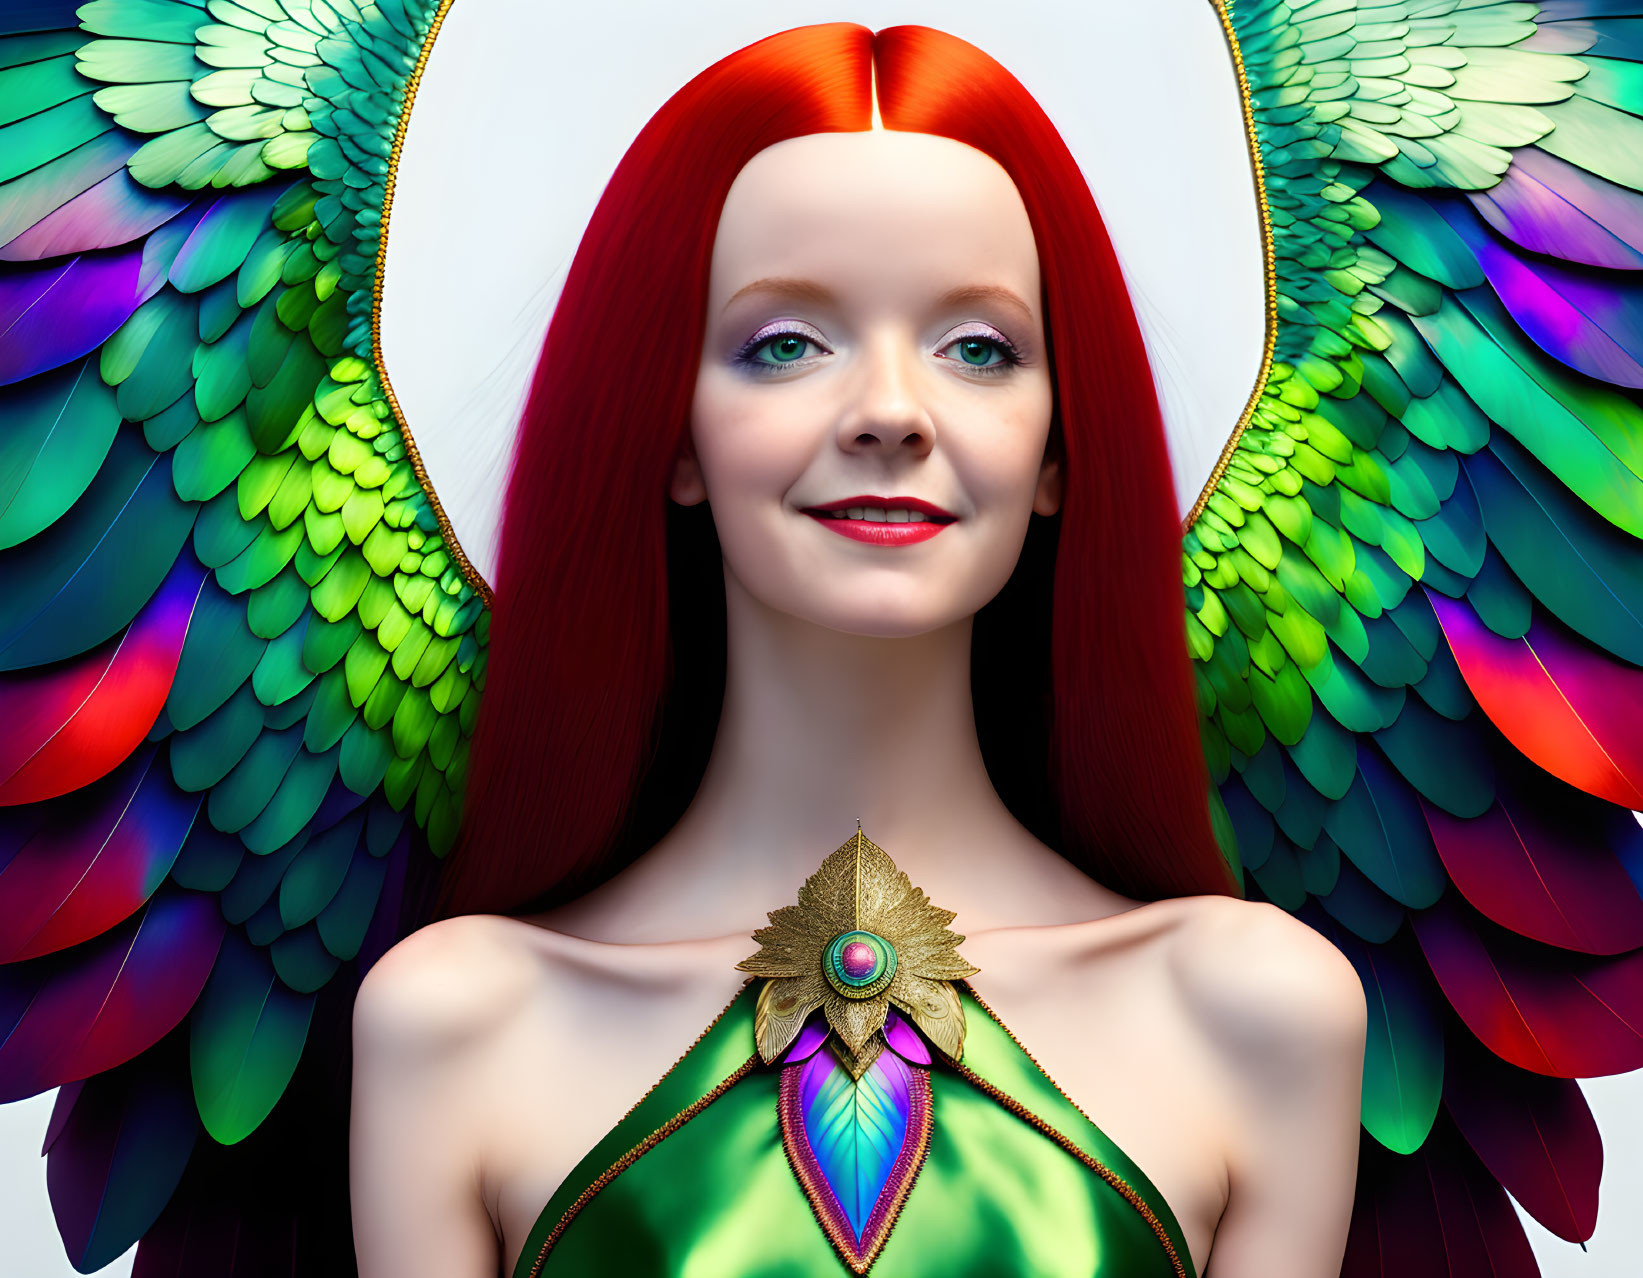 Vibrant red-haired woman with parrot-like wings in green dress.